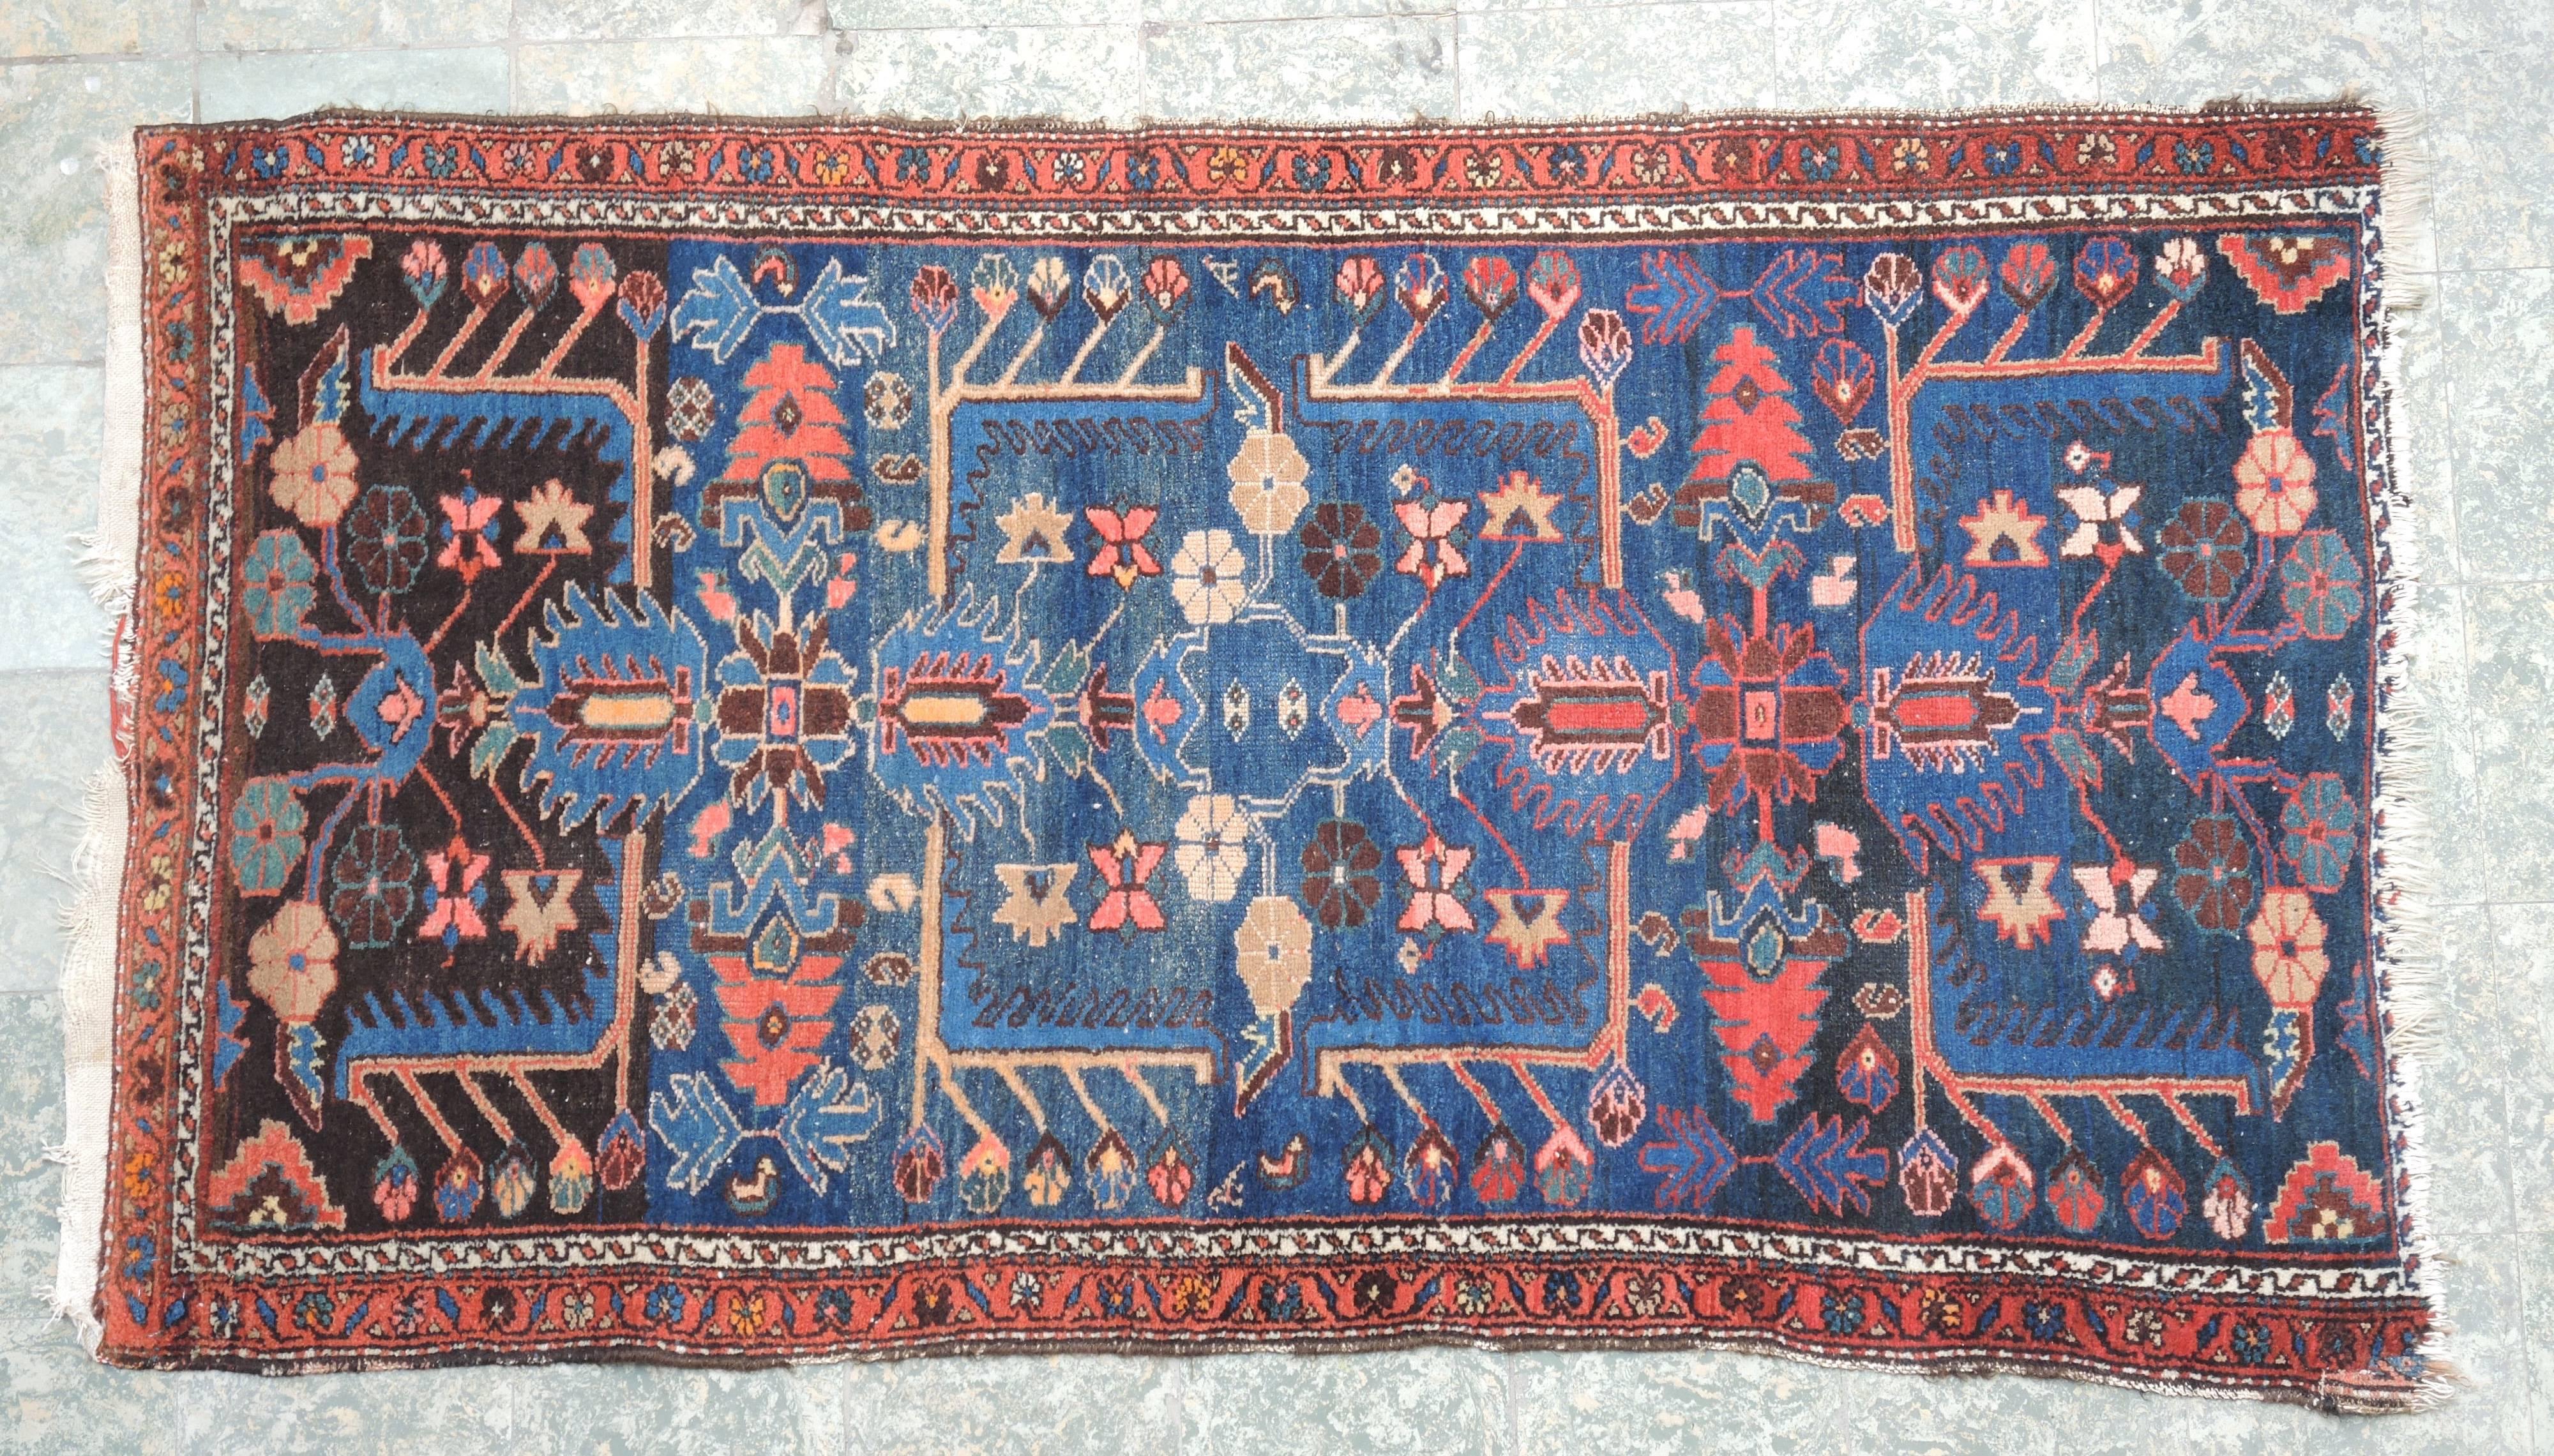 Graphic design and rich blue and wine colors make this Persian carpet a versatile piece to use in a modern or traditional setting.